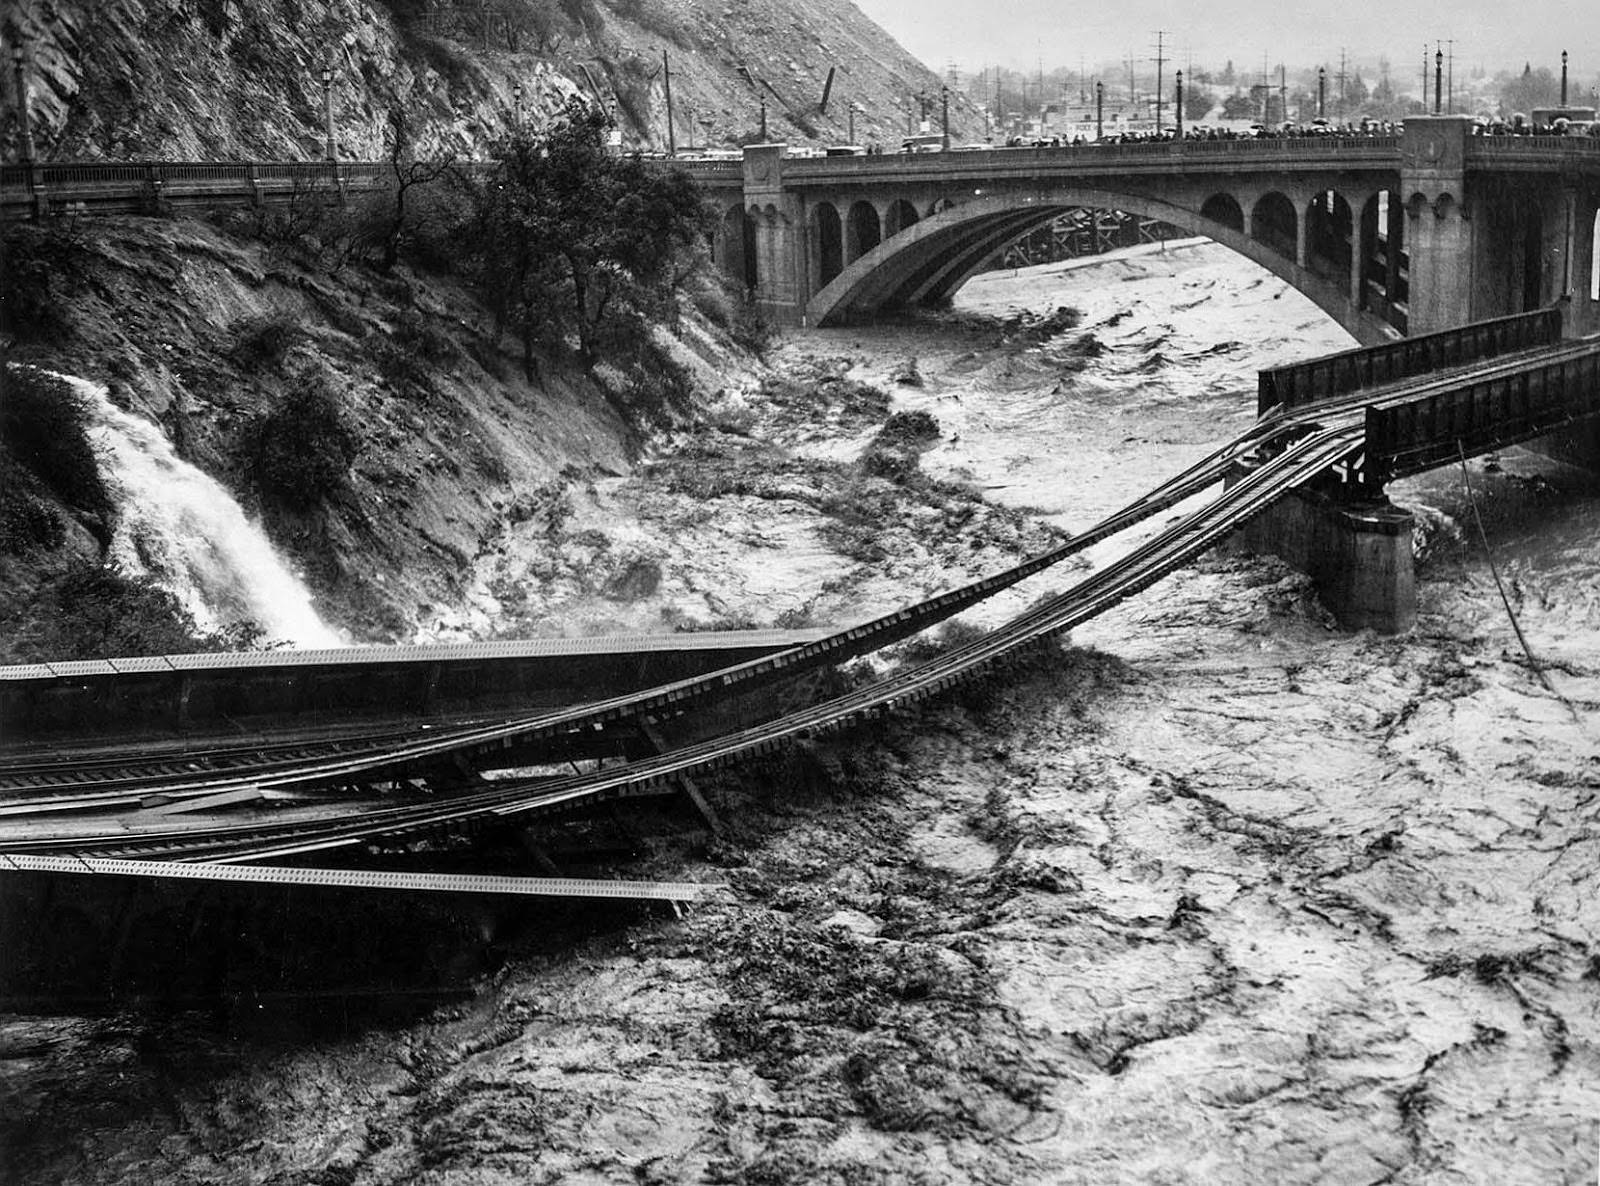 Floodwaters in Los Angeles River destroy Southern Pacific railroad bridge. The photo was taken from North Figueroa Street bridge, 1938